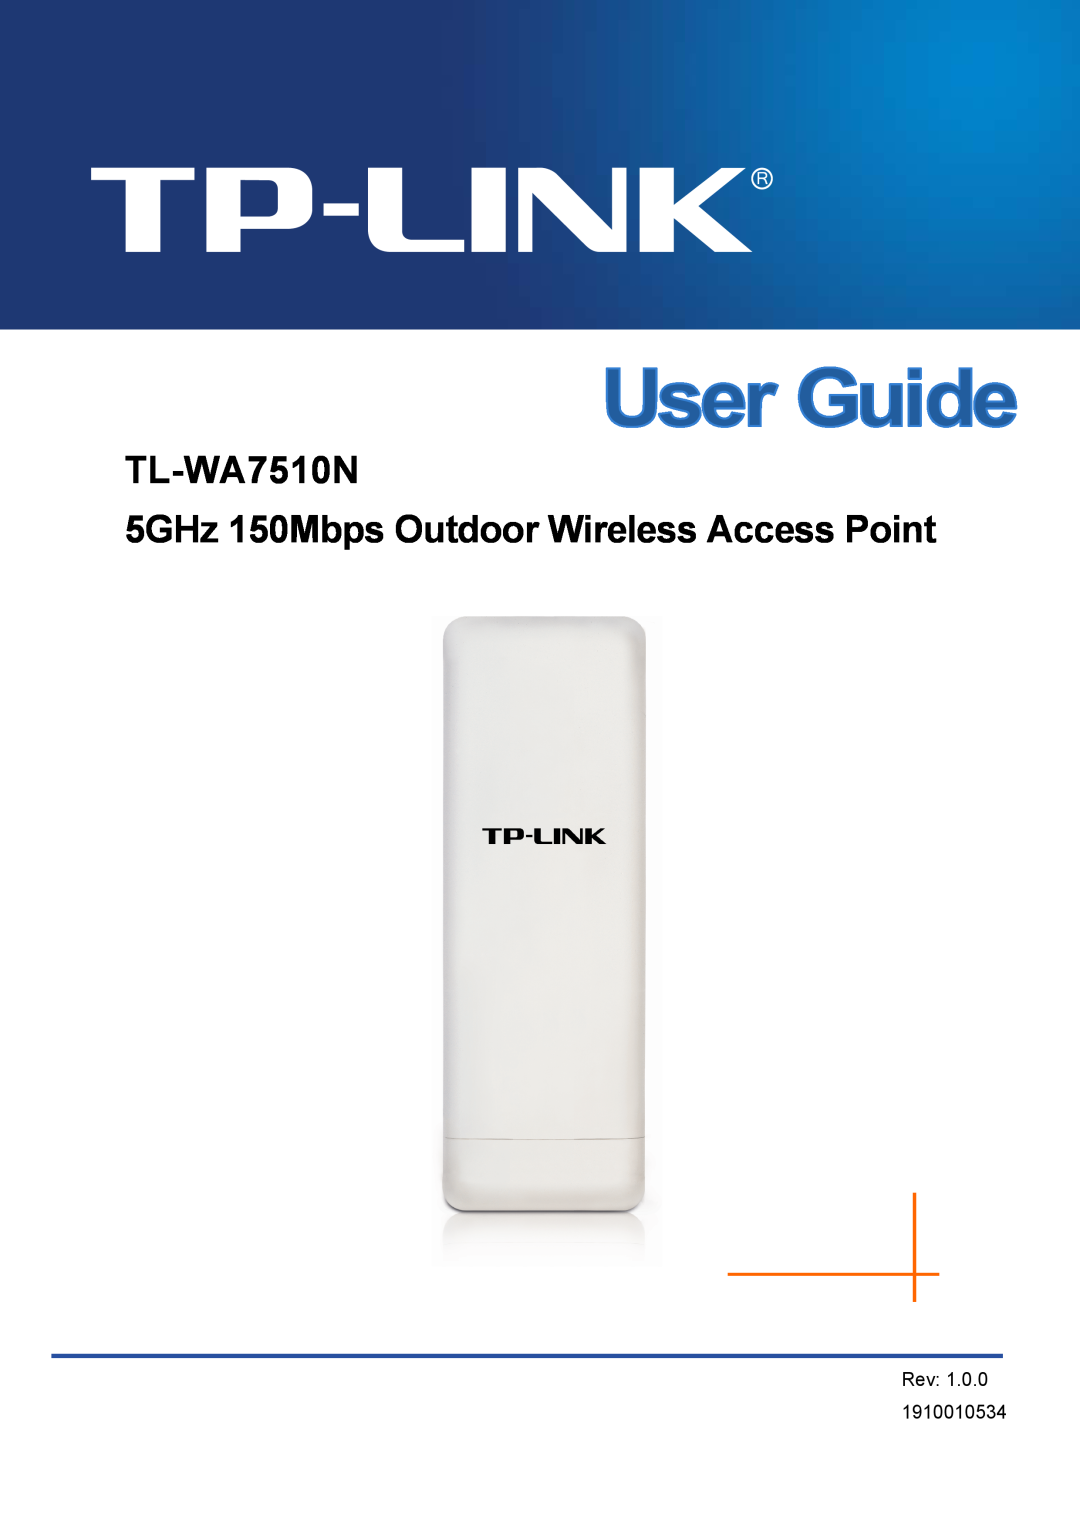 TP-Link manual TL-WA7510N 5GHz 150Mbps Outdoor Wireless Access Point, Rev 1.0.0 